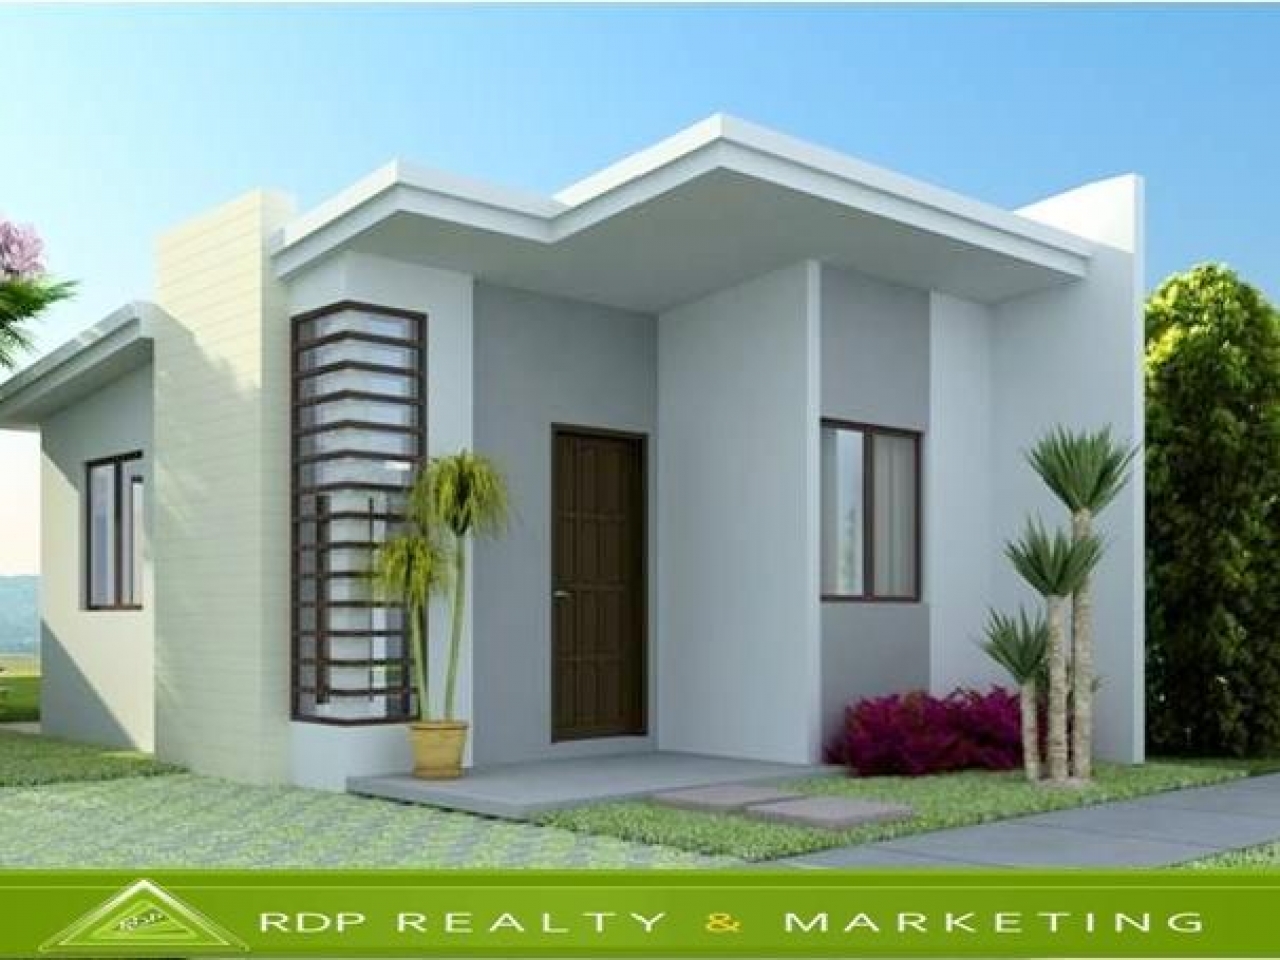 Modern Bungalow House Designs Philippines Small Bungalow